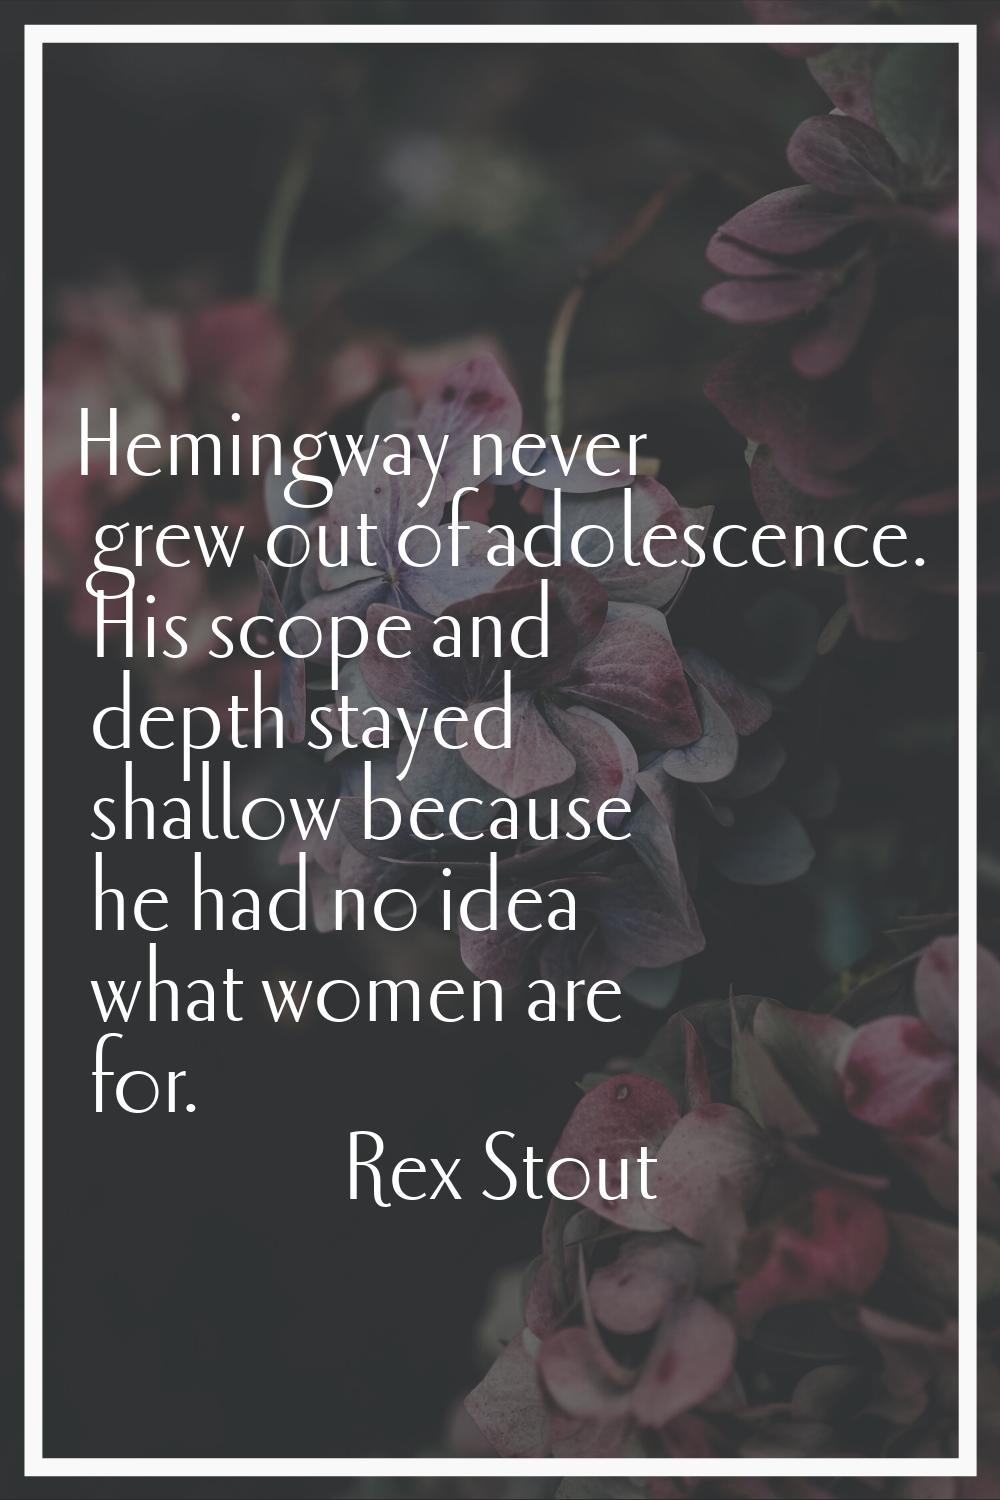 Hemingway never grew out of adolescence. His scope and depth stayed shallow because he had no idea 